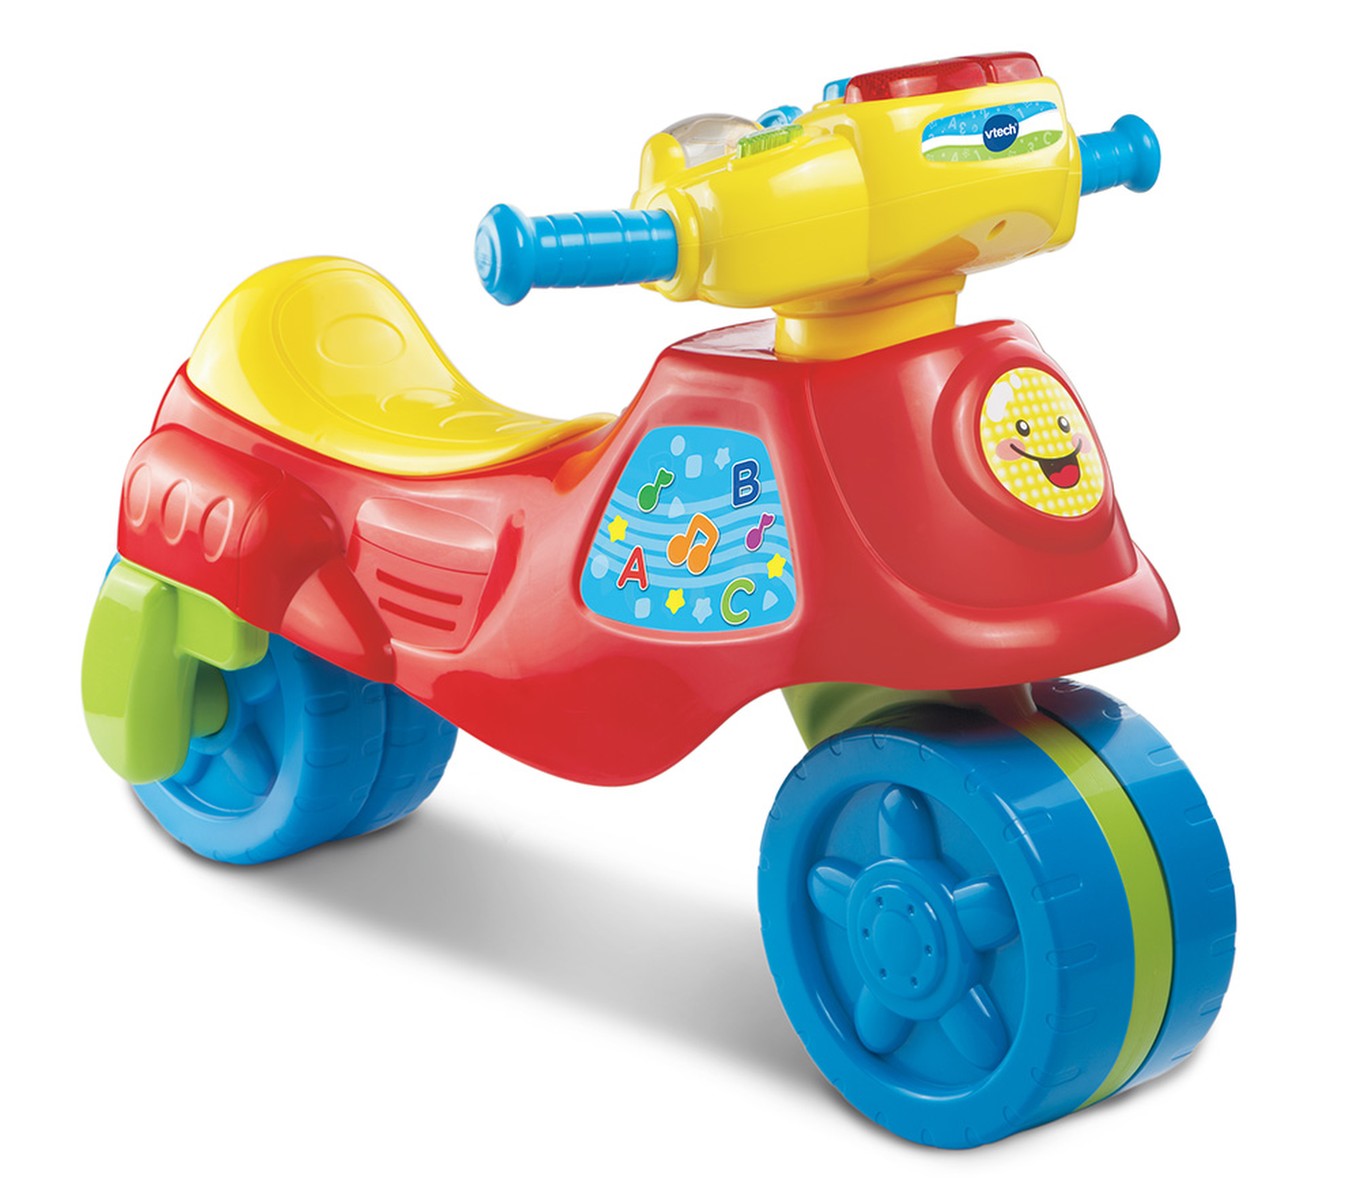 toy motorbikes for toddlers